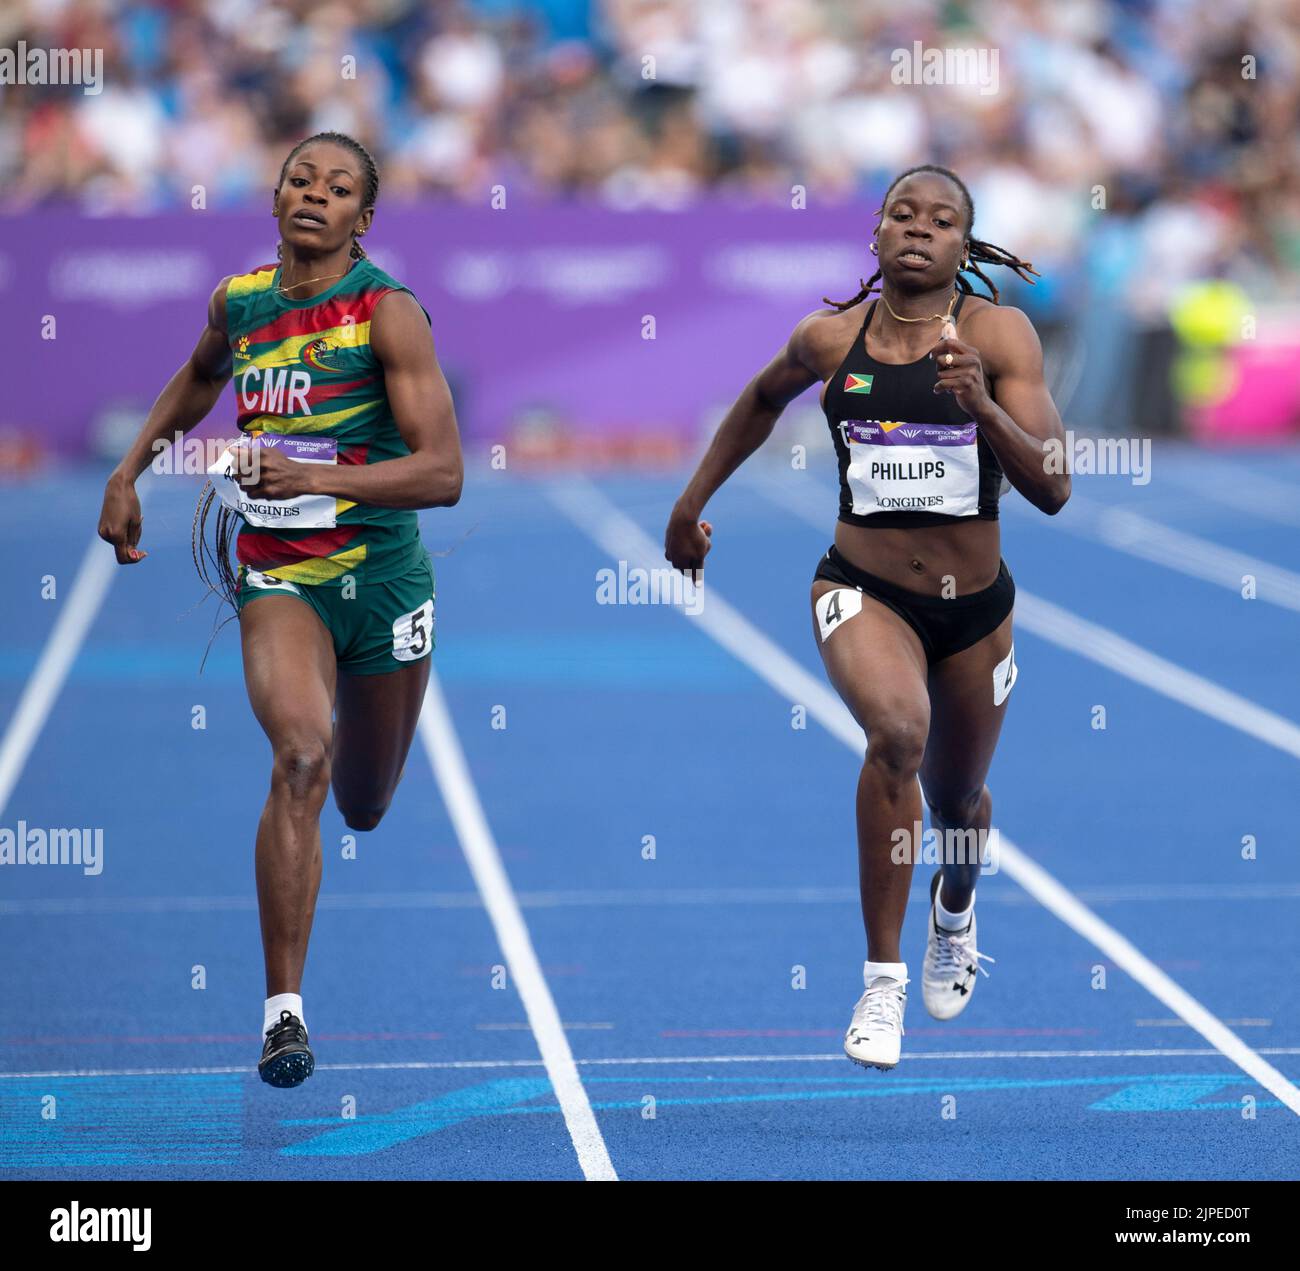 Linda Angounou and Kenisha Phillips competing in the women’s 200m heats at Commonwealth Games at Alexander Stadium, Birmingham, England, on 4th August Stock Photo